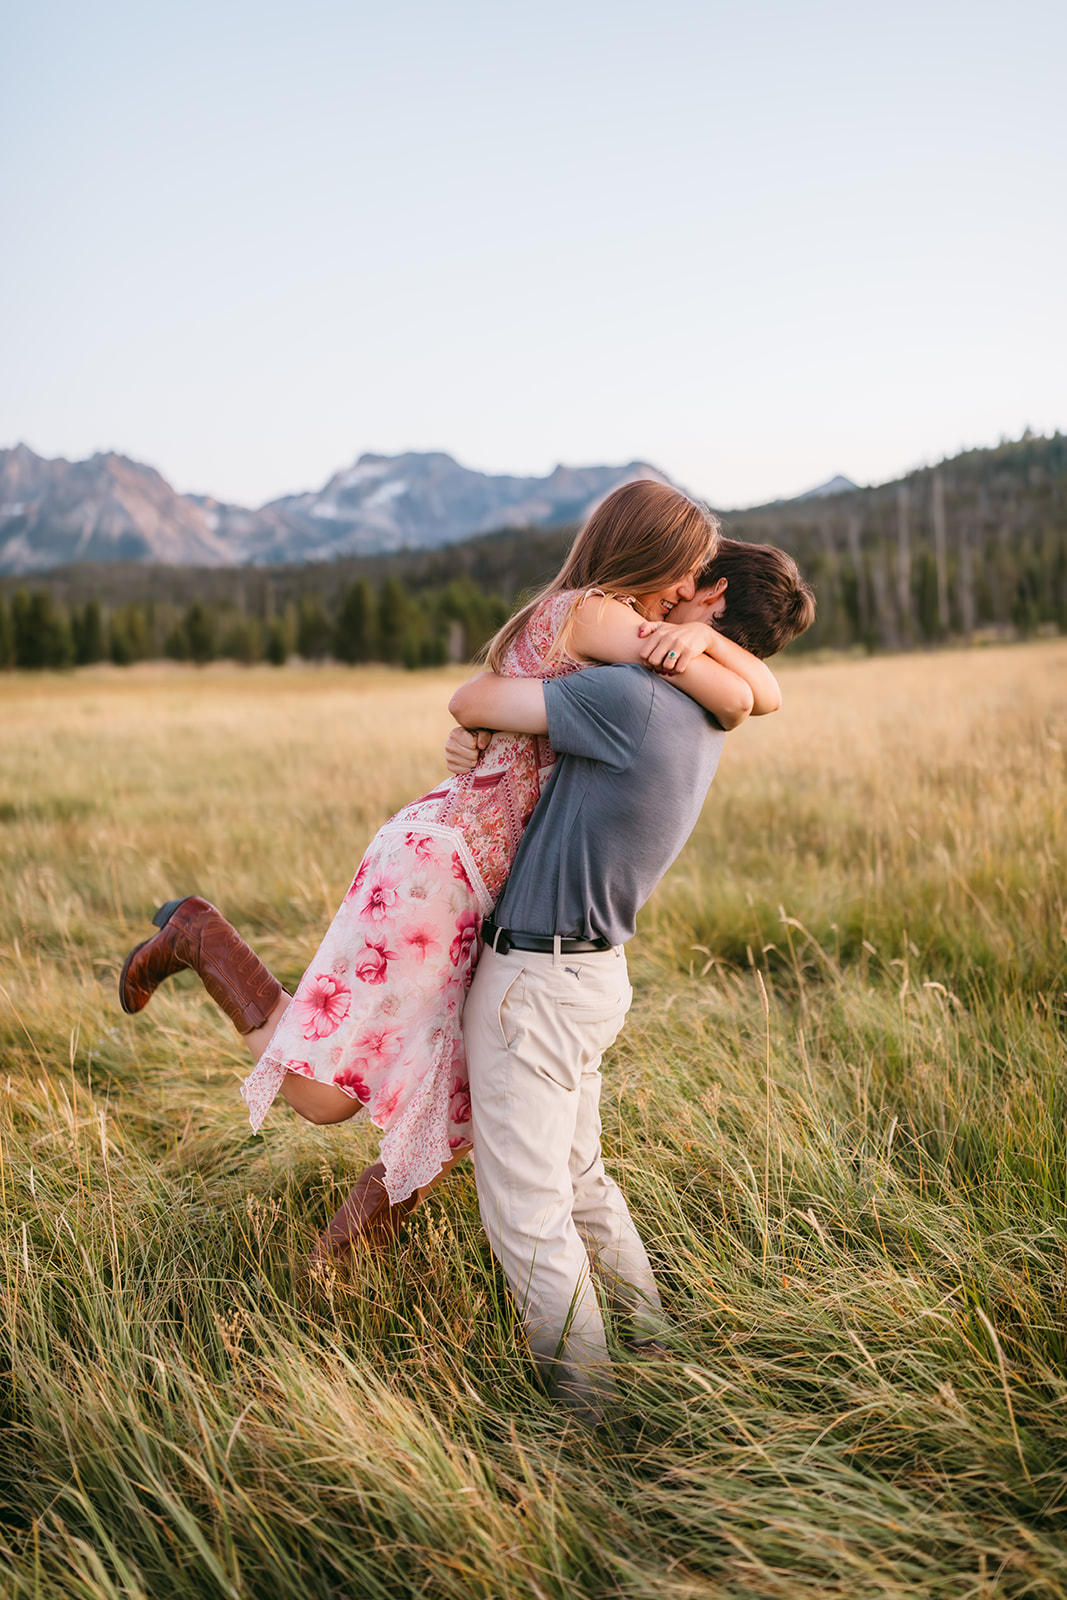 Summer Sunset Engagement Photoshoot in The Sawtooth Mountains of Stanley, Idaho